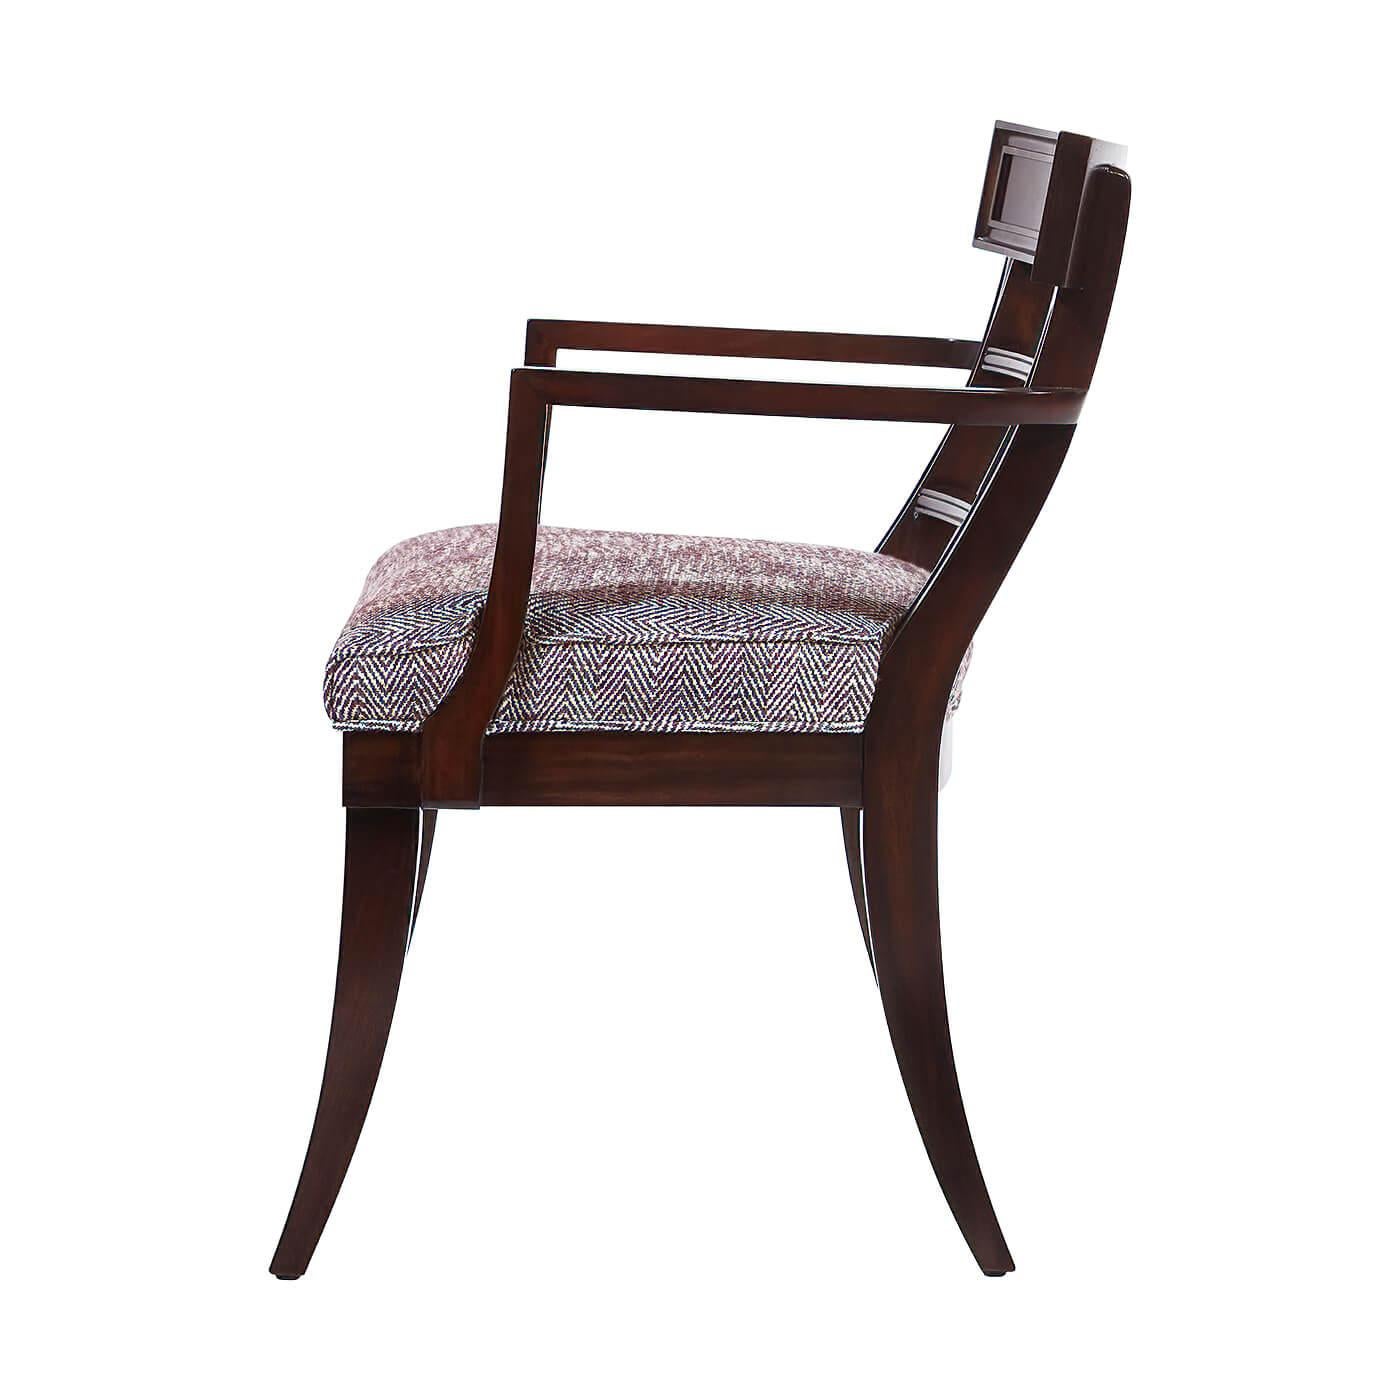 The typical lead time is 12- 16 weeks.
A Regency style classic klismos form armchair with a channel reeded frame on the upper back, recessed back rails with channel detail, and recessed rosettes above slim slightly curved legs. An upholstered seat